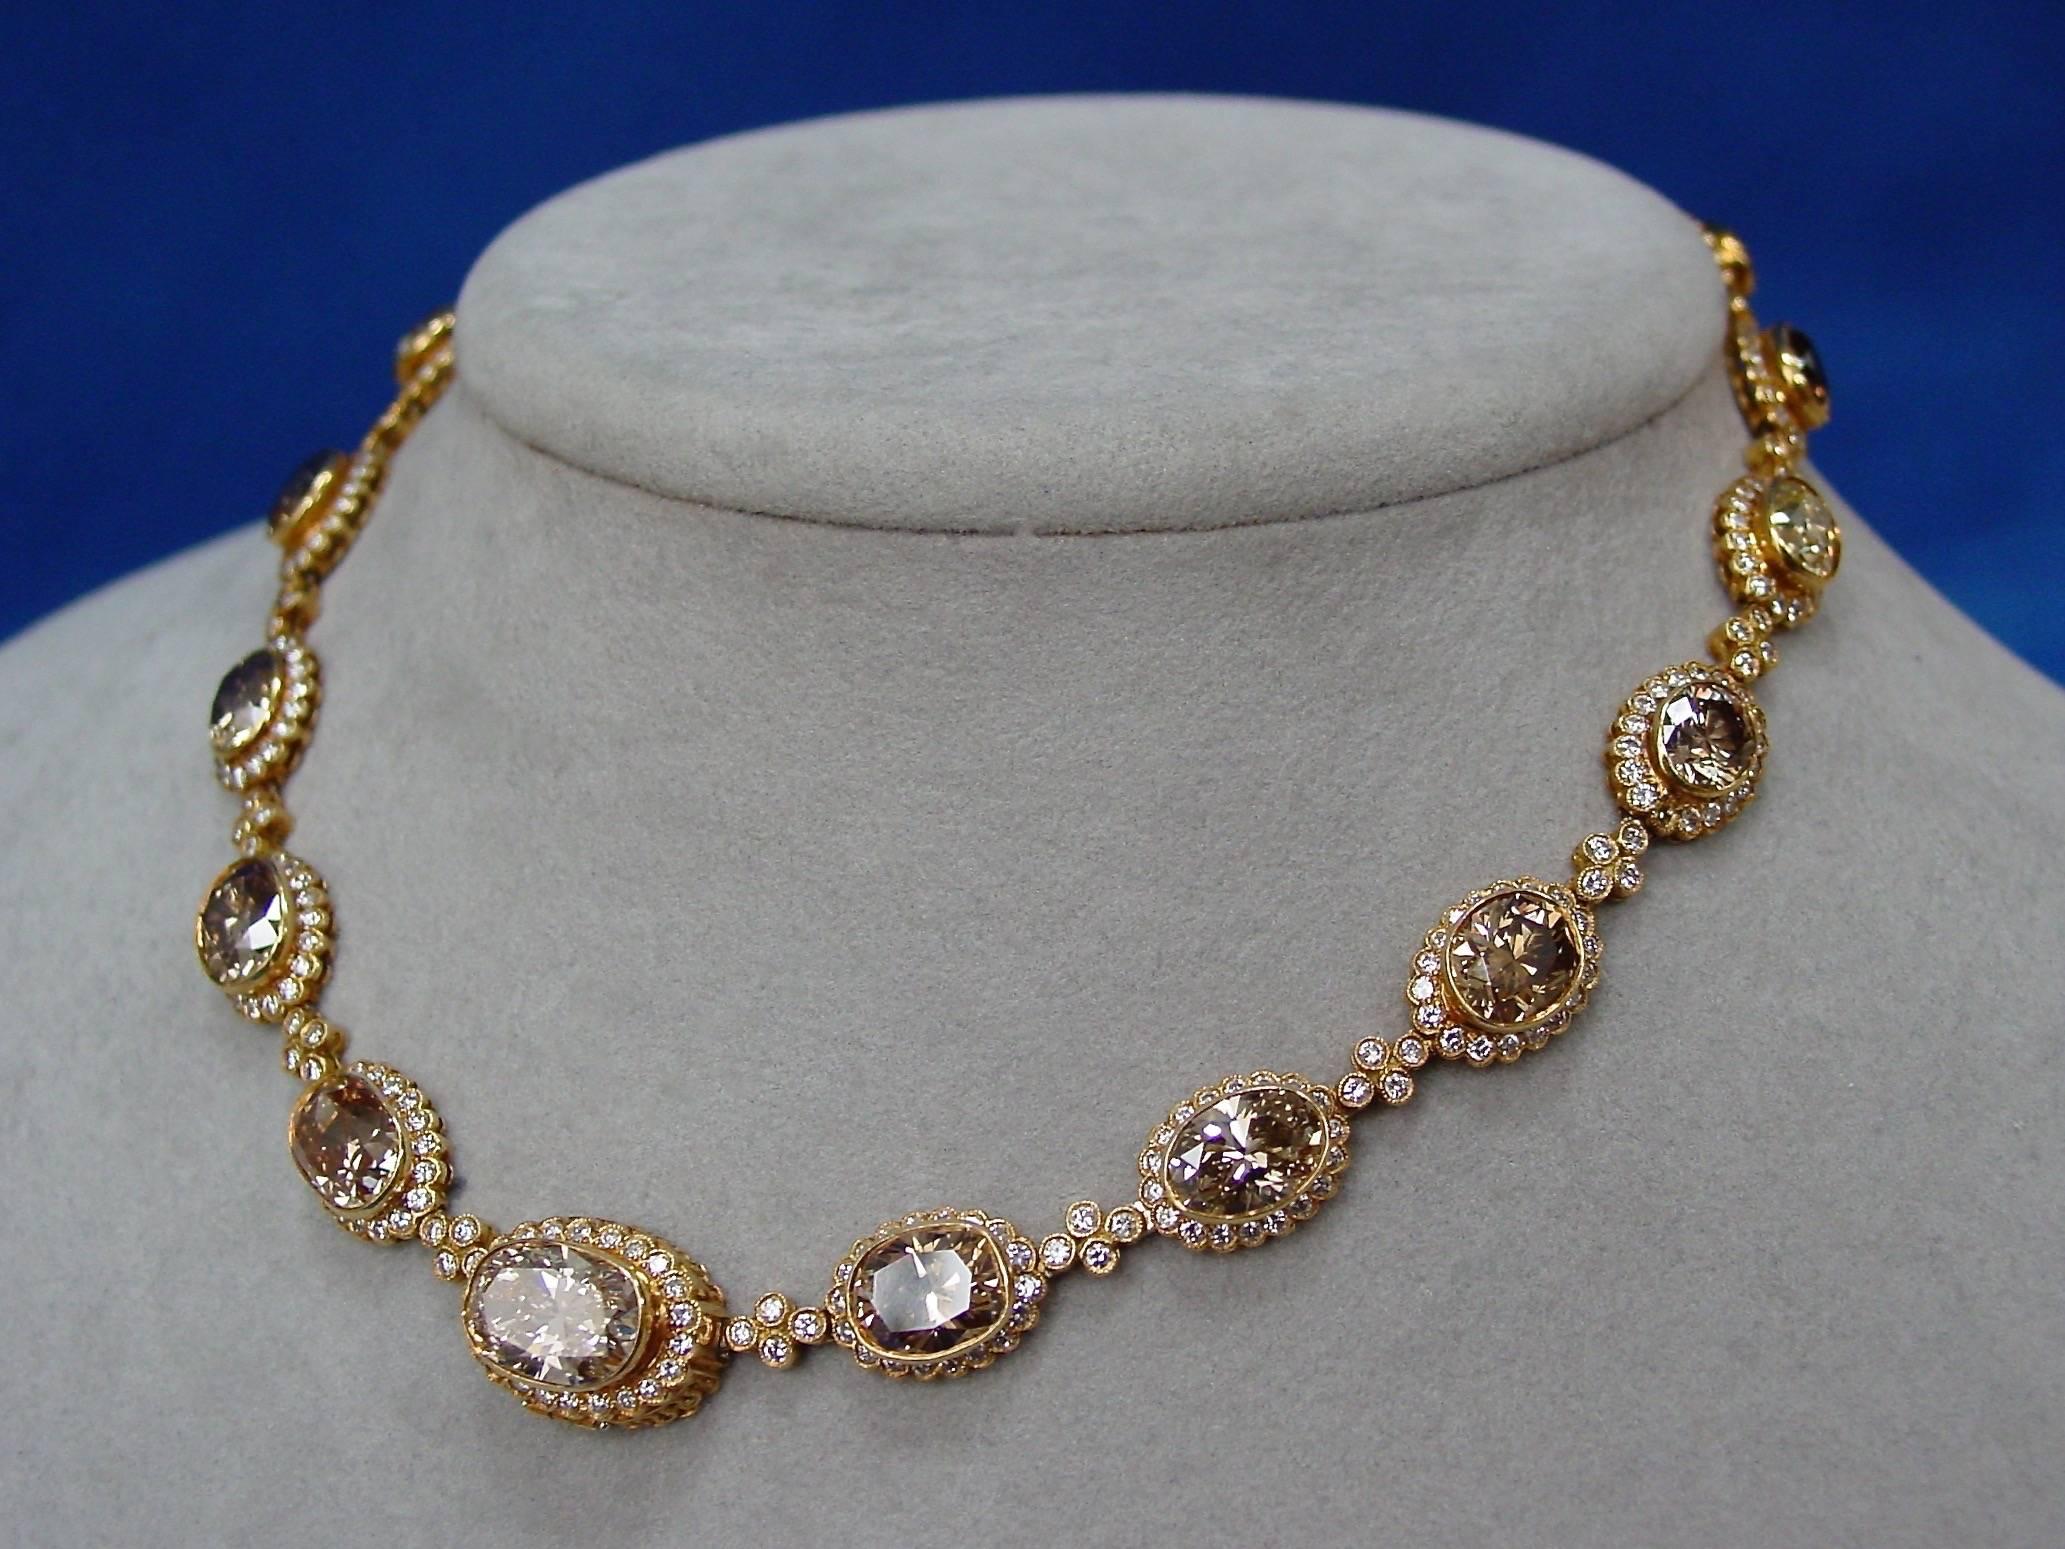 A Fancy Colored Diamond Necklace Mounted in 18 Karat Yellow Gold by Julius Cohen. This beautifully fabricated necklace features oval bezel set diamonds in a range of light yellow to deep brown, set off by flutings of round brilliant diamonds and